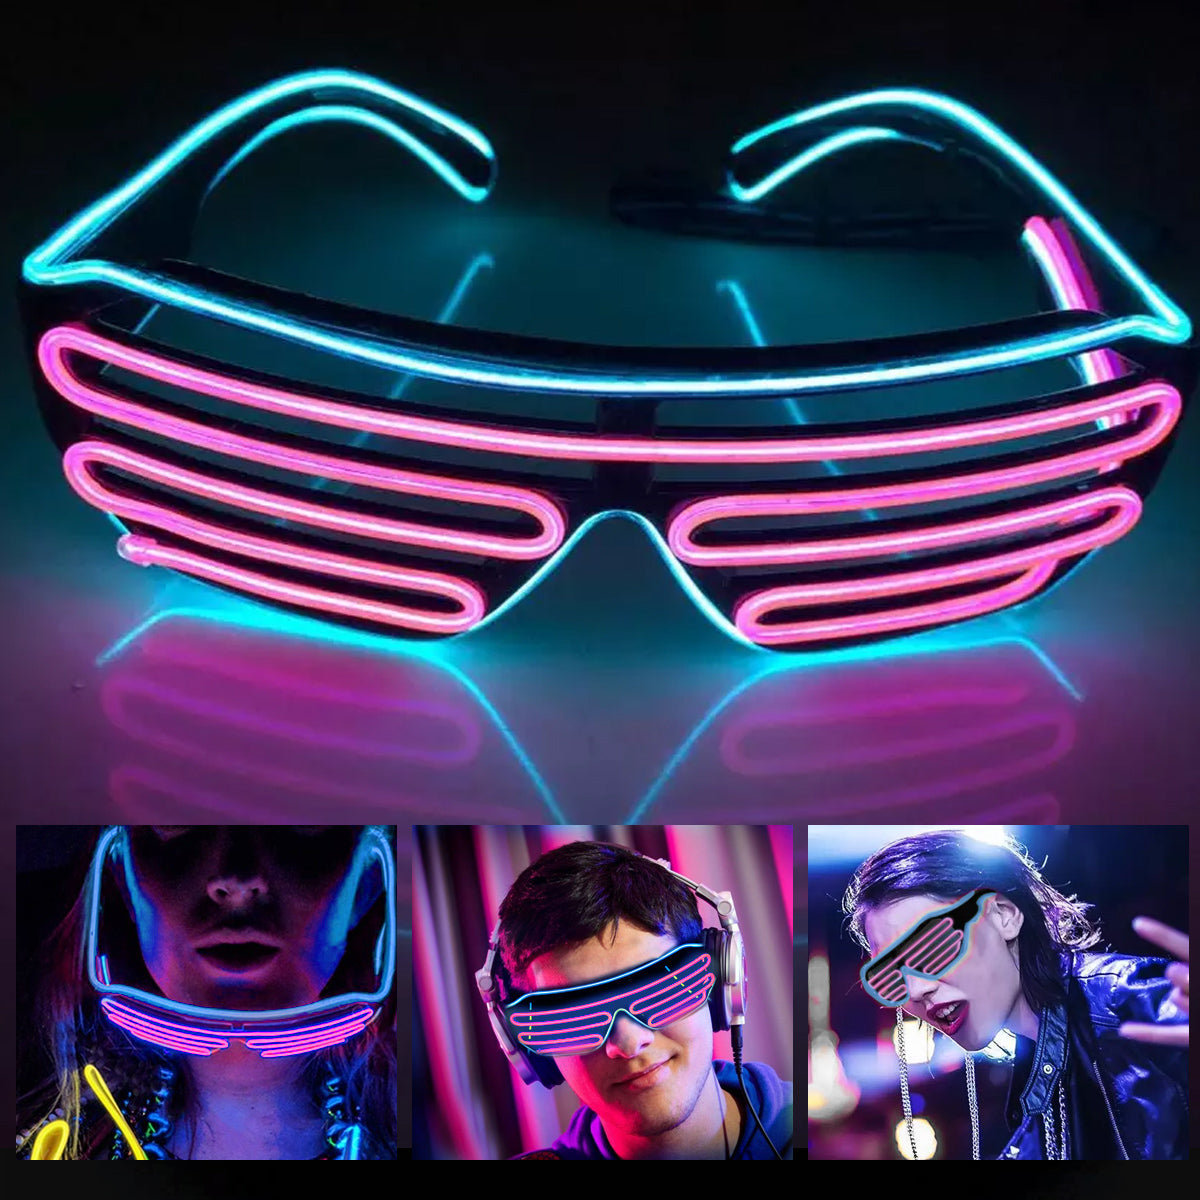 PATPAT Party Glasses, Light Up Flashing Shutter Neon Glasses, Two-Tone Glasses Glow in The Dark for Rave Party, Halloween, Christmas, 3 Light Modes (Blue - Pink)